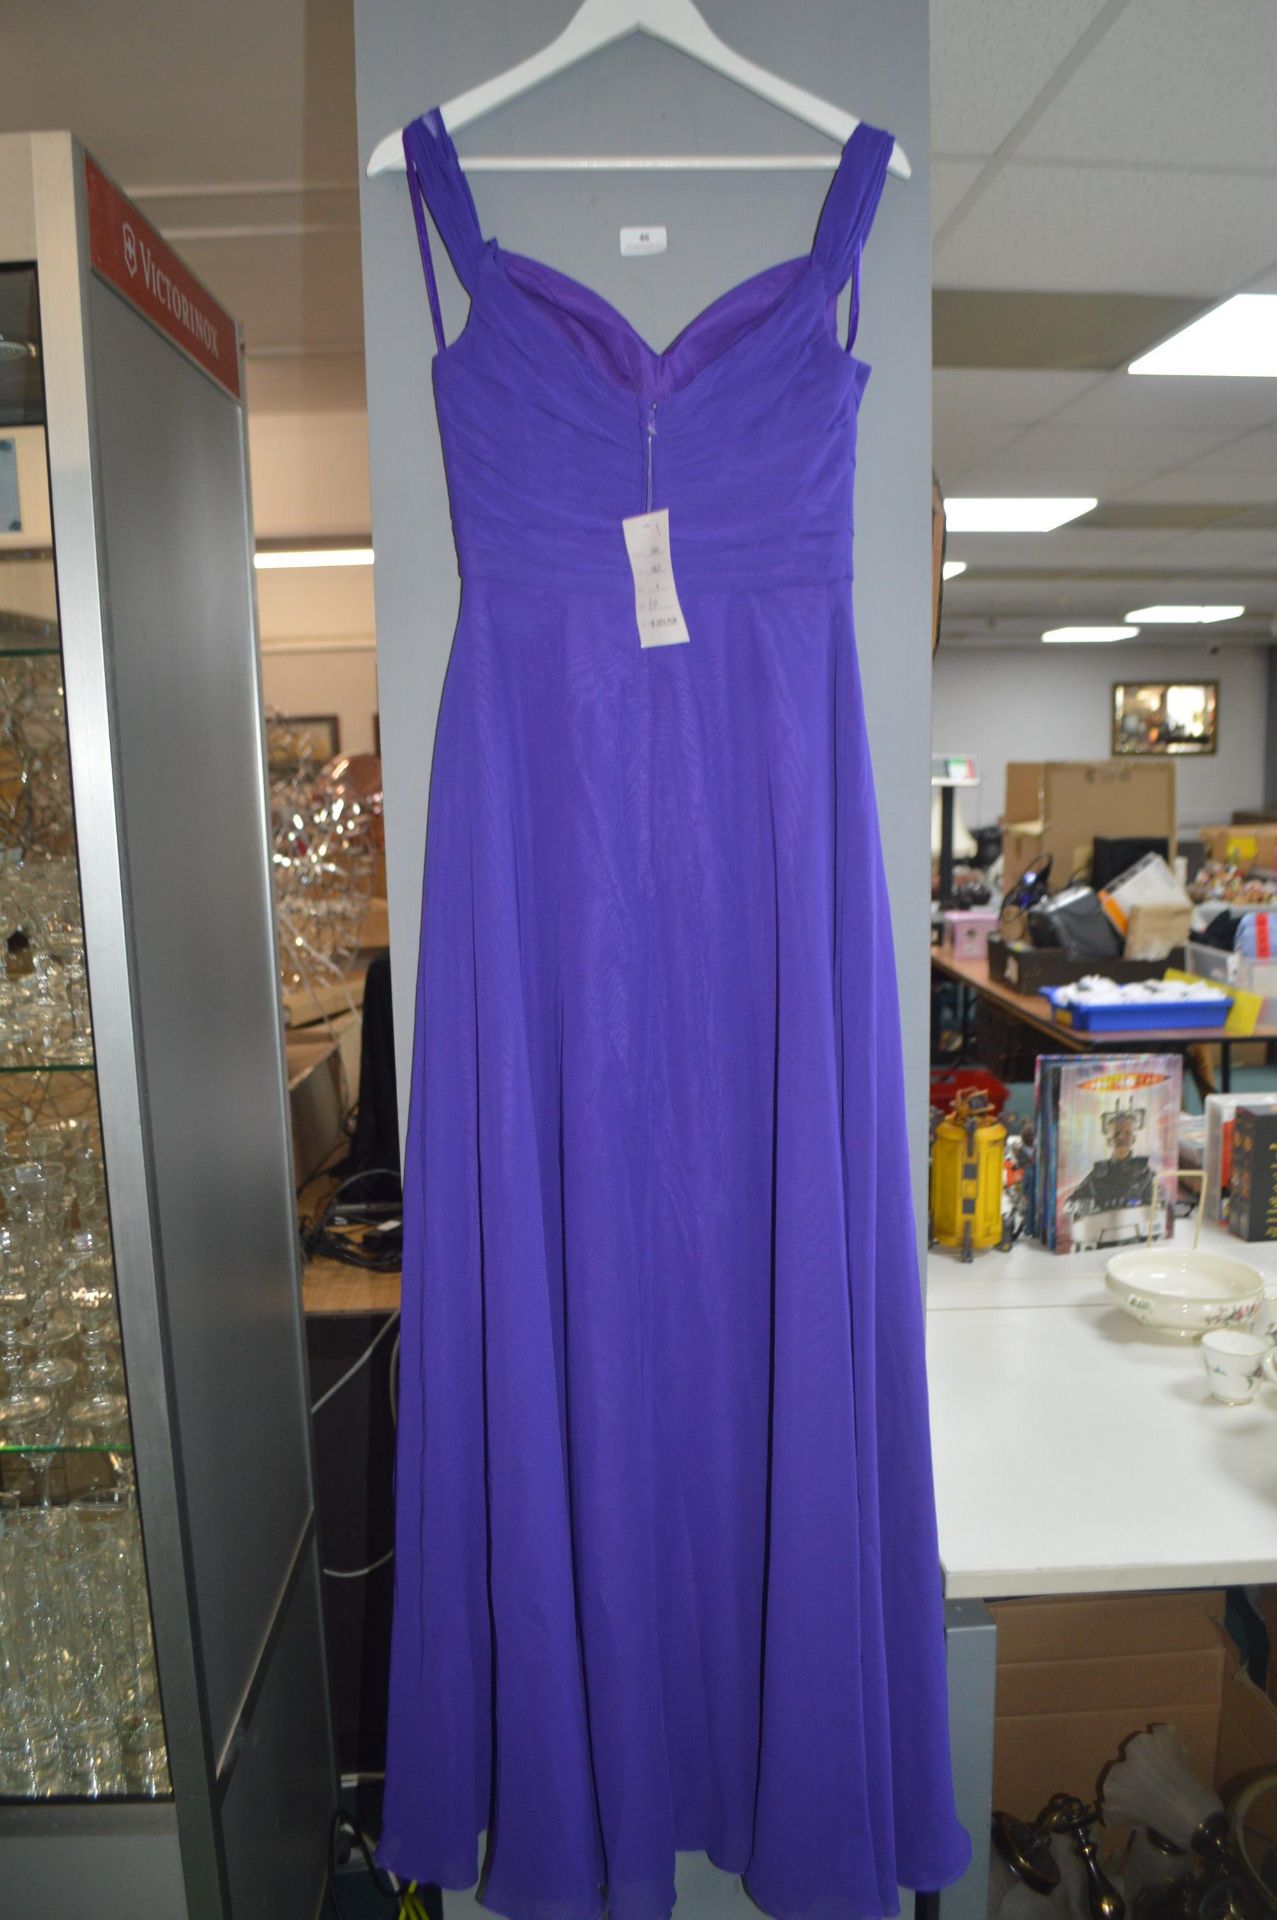 Evening Dress in Violet by Kenneth Winston for Private Label Size: 4 - Image 2 of 2